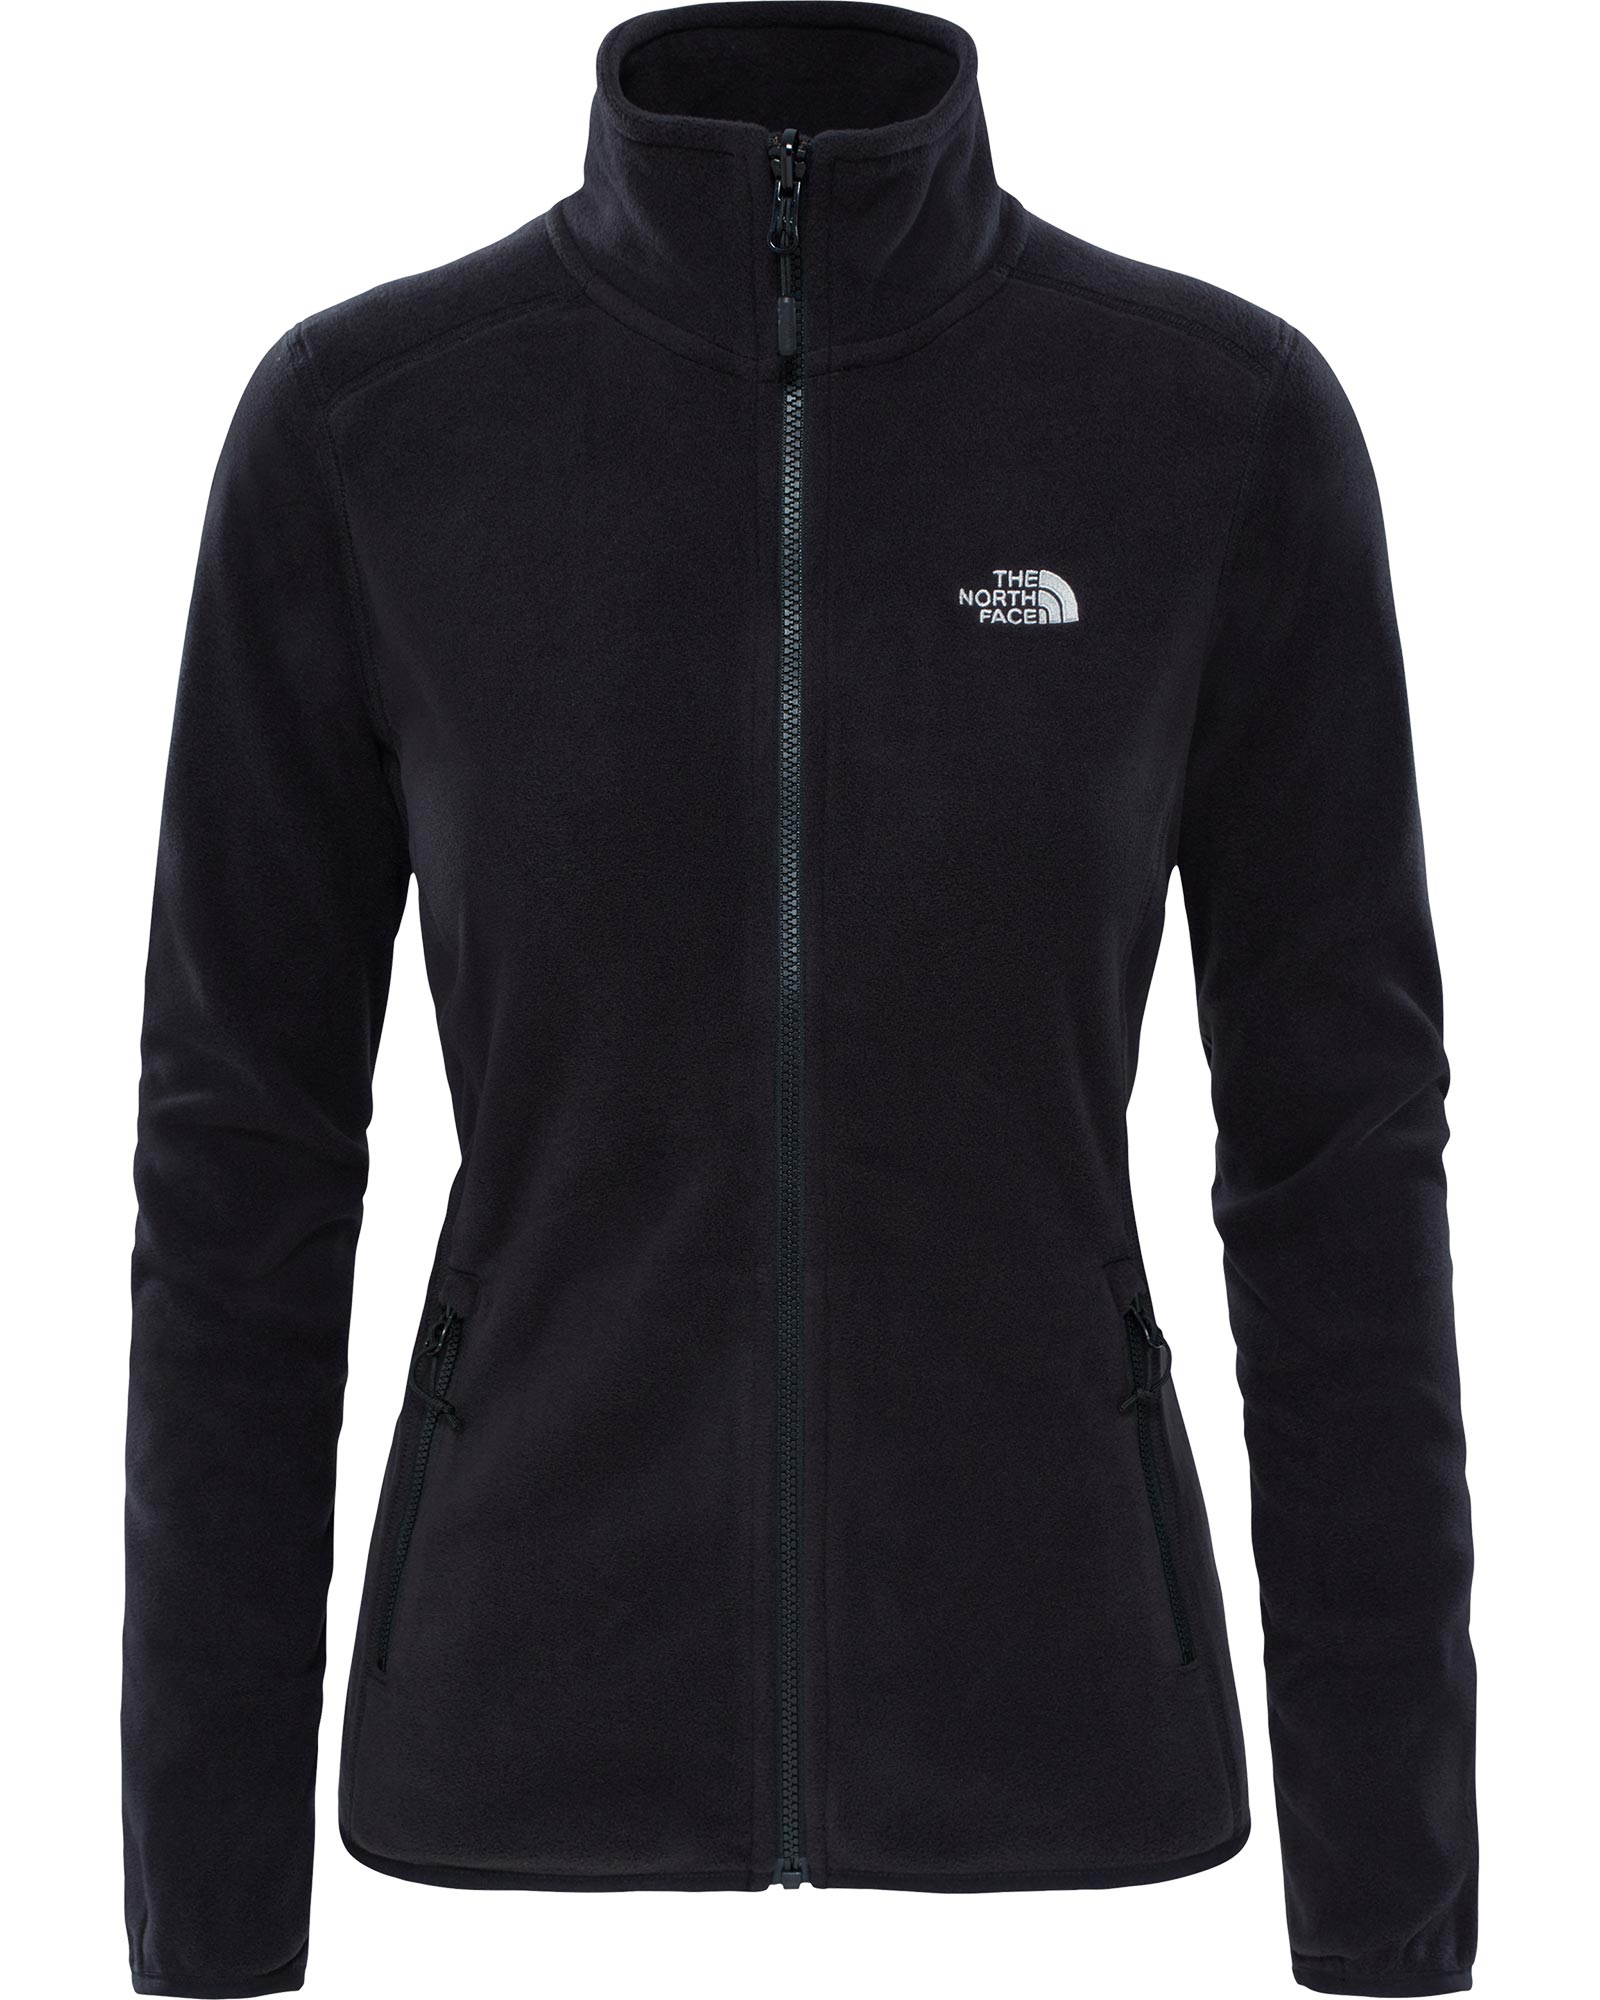 The North Face 100 Glacier Womens Full Zip Jacket